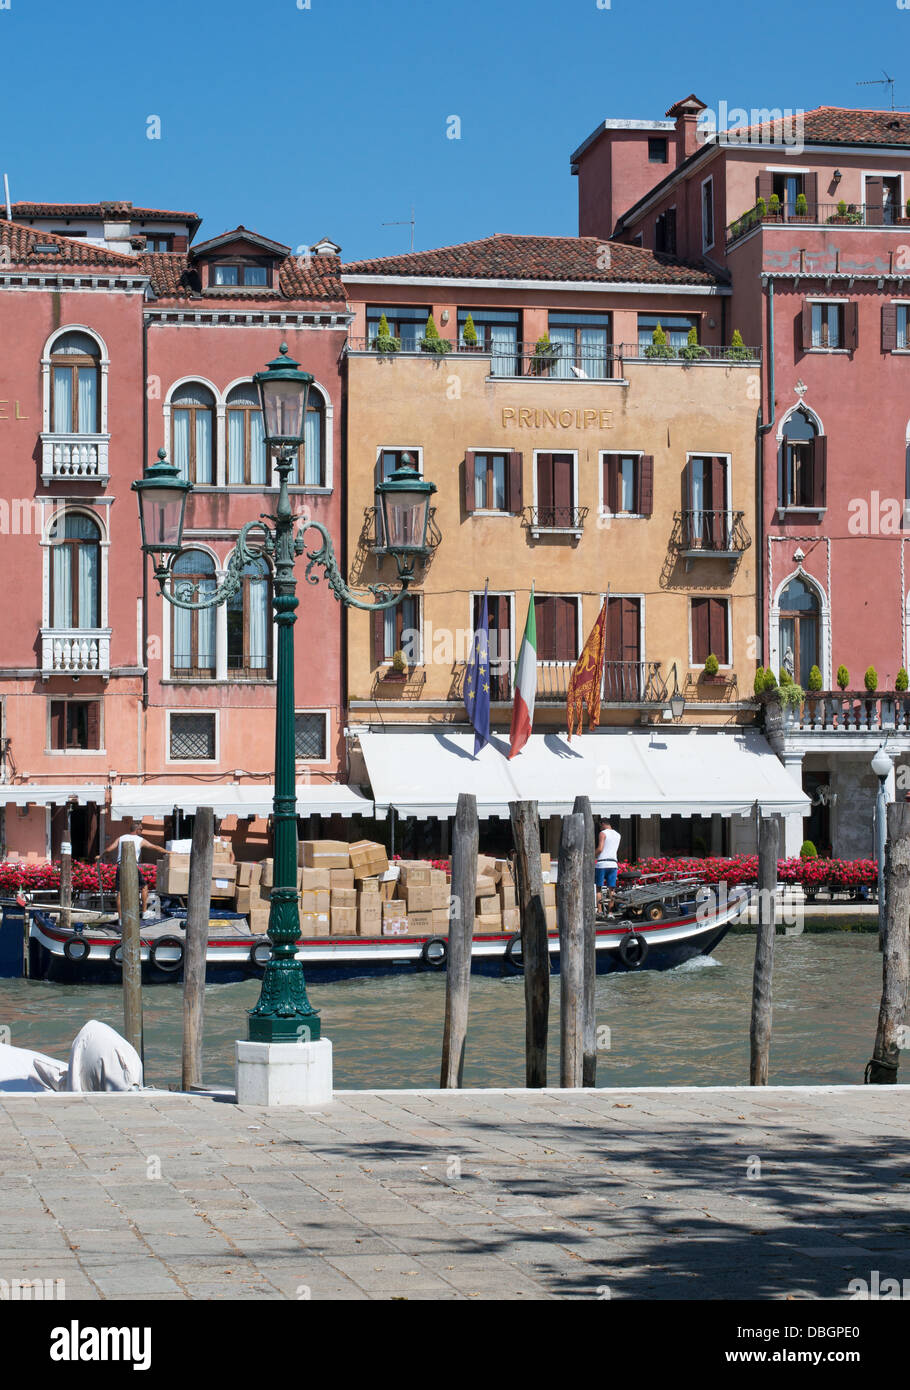 A work boat passes along the Grand Canal in front of the Hotel Principe, Venice Stock Photo